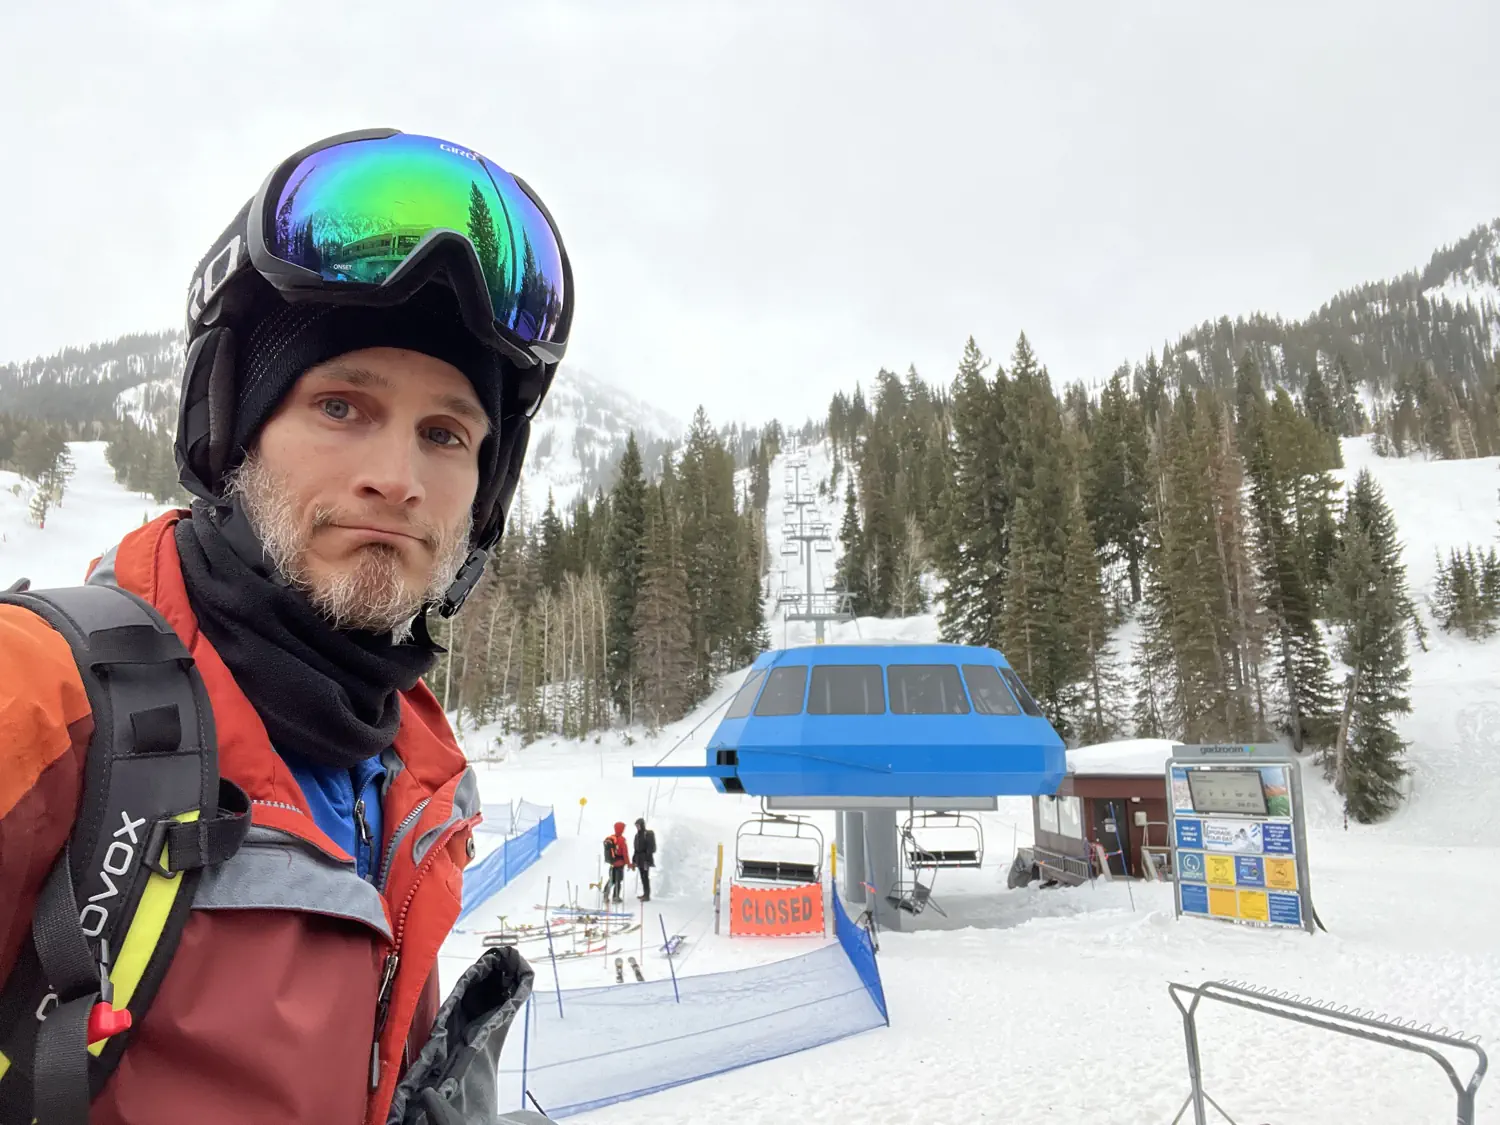 Keith is patiently waiting to see if the Gadzoom lift will open at Snowbird